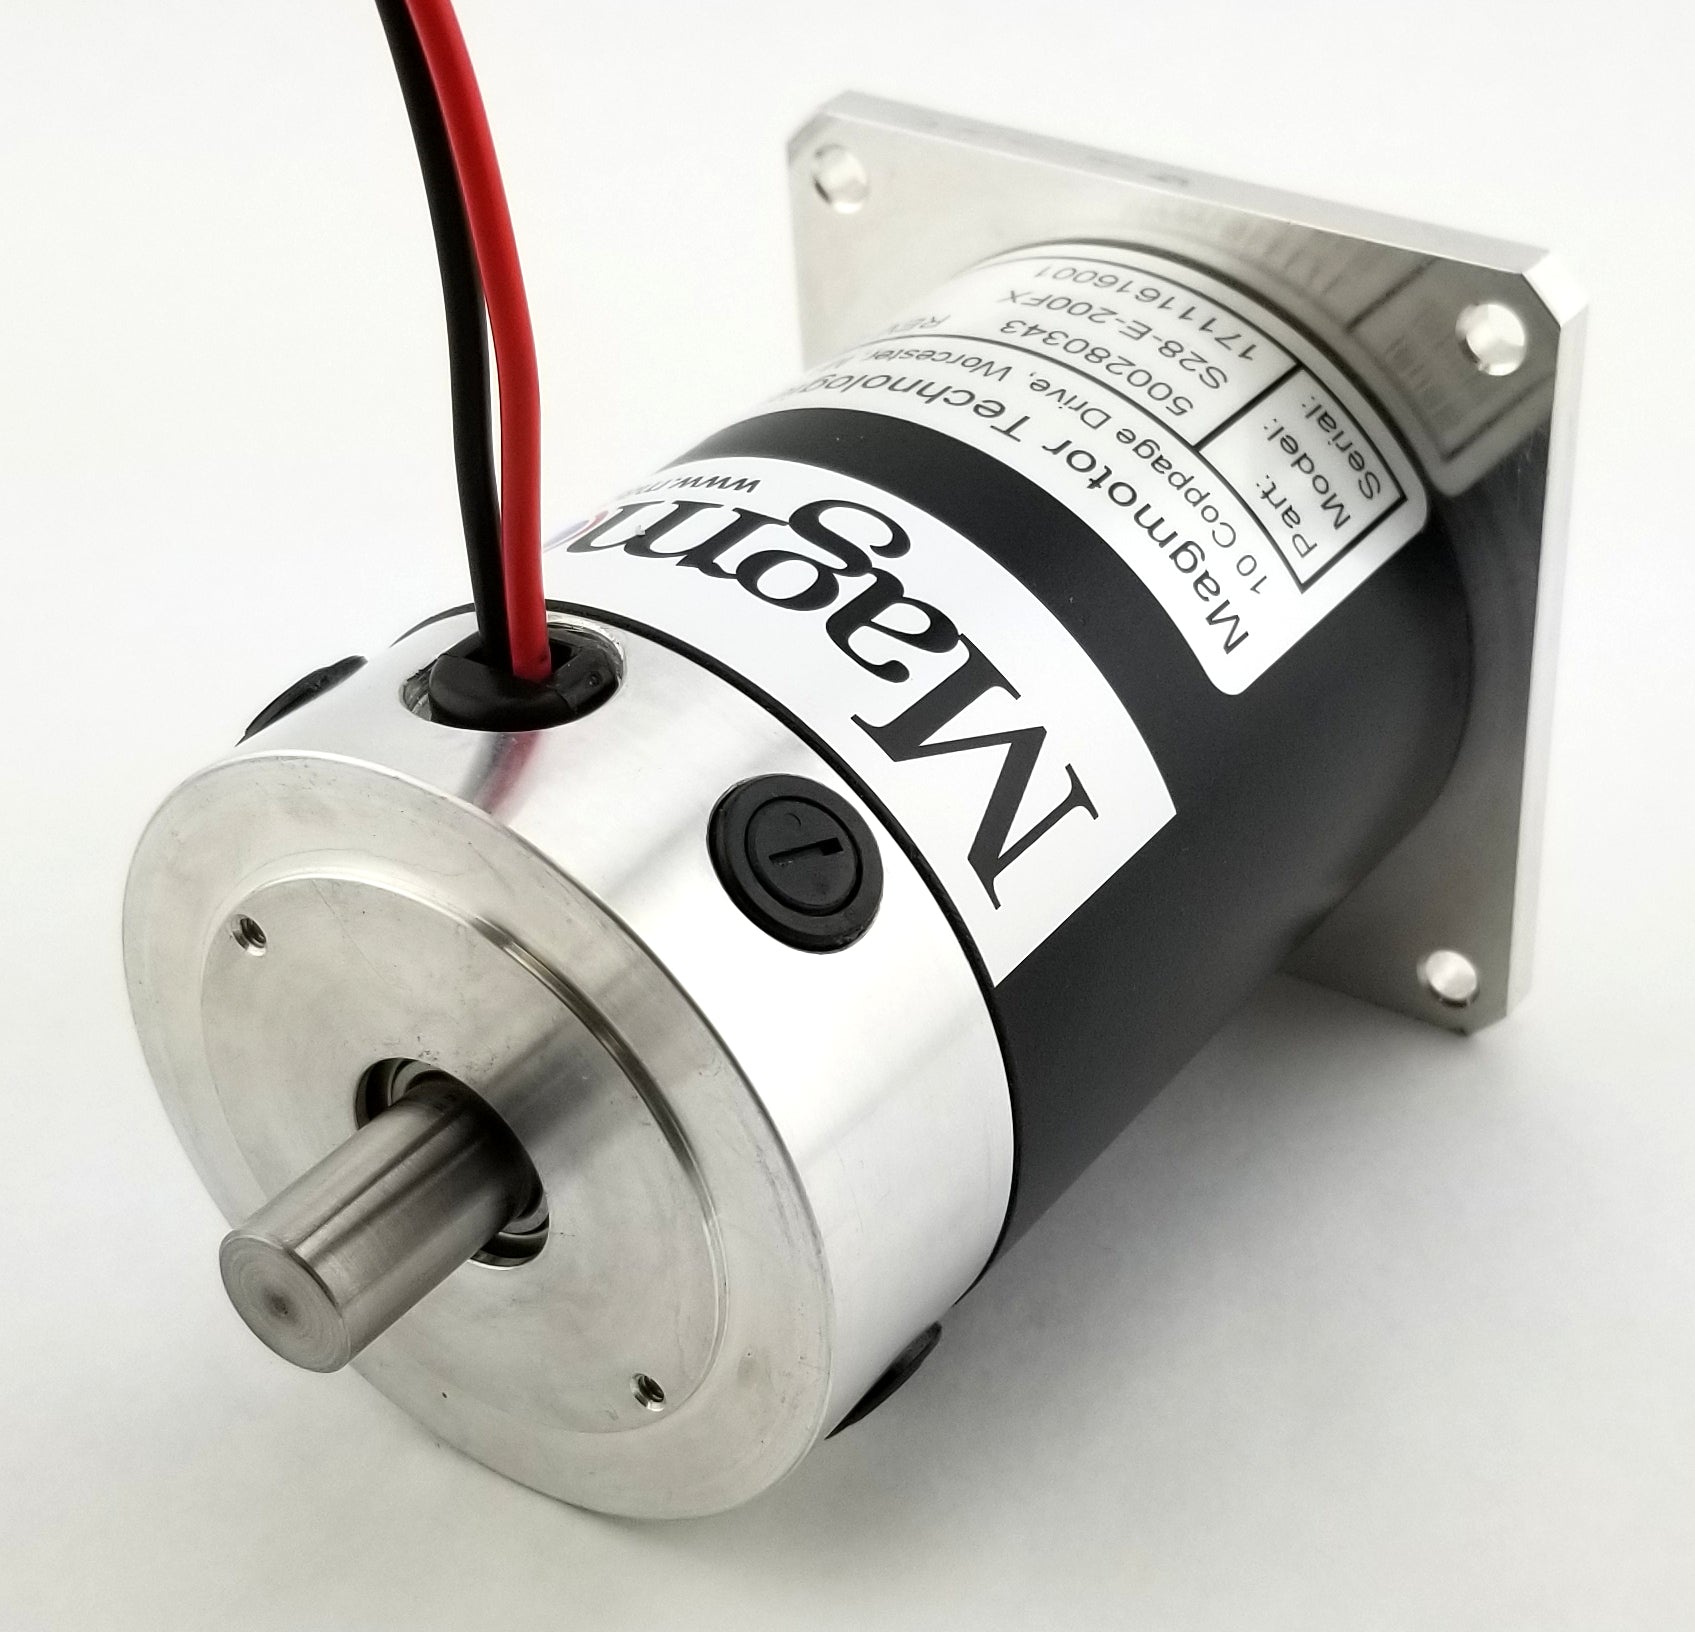 Magmotor S28-E-200FX 12 to 30 Volt 4 Pole Brushed Motor 500280343 Rear View